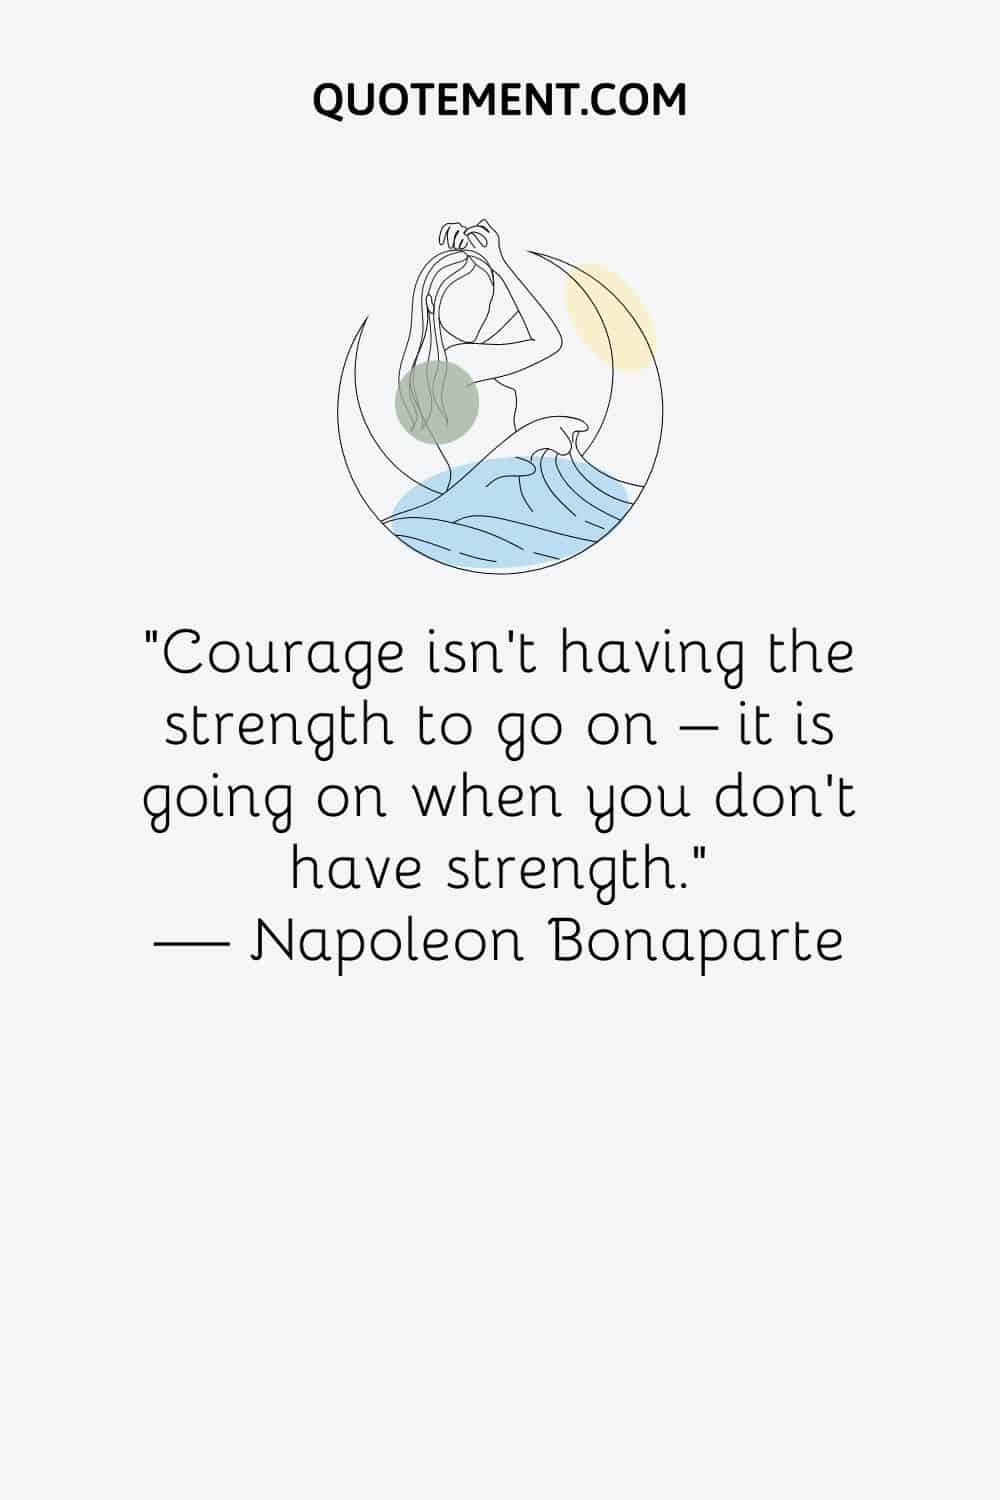 “Courage isn’t having the strength to go on – it is going on when you don’t have strength.” ― Napoleon Bonaparte